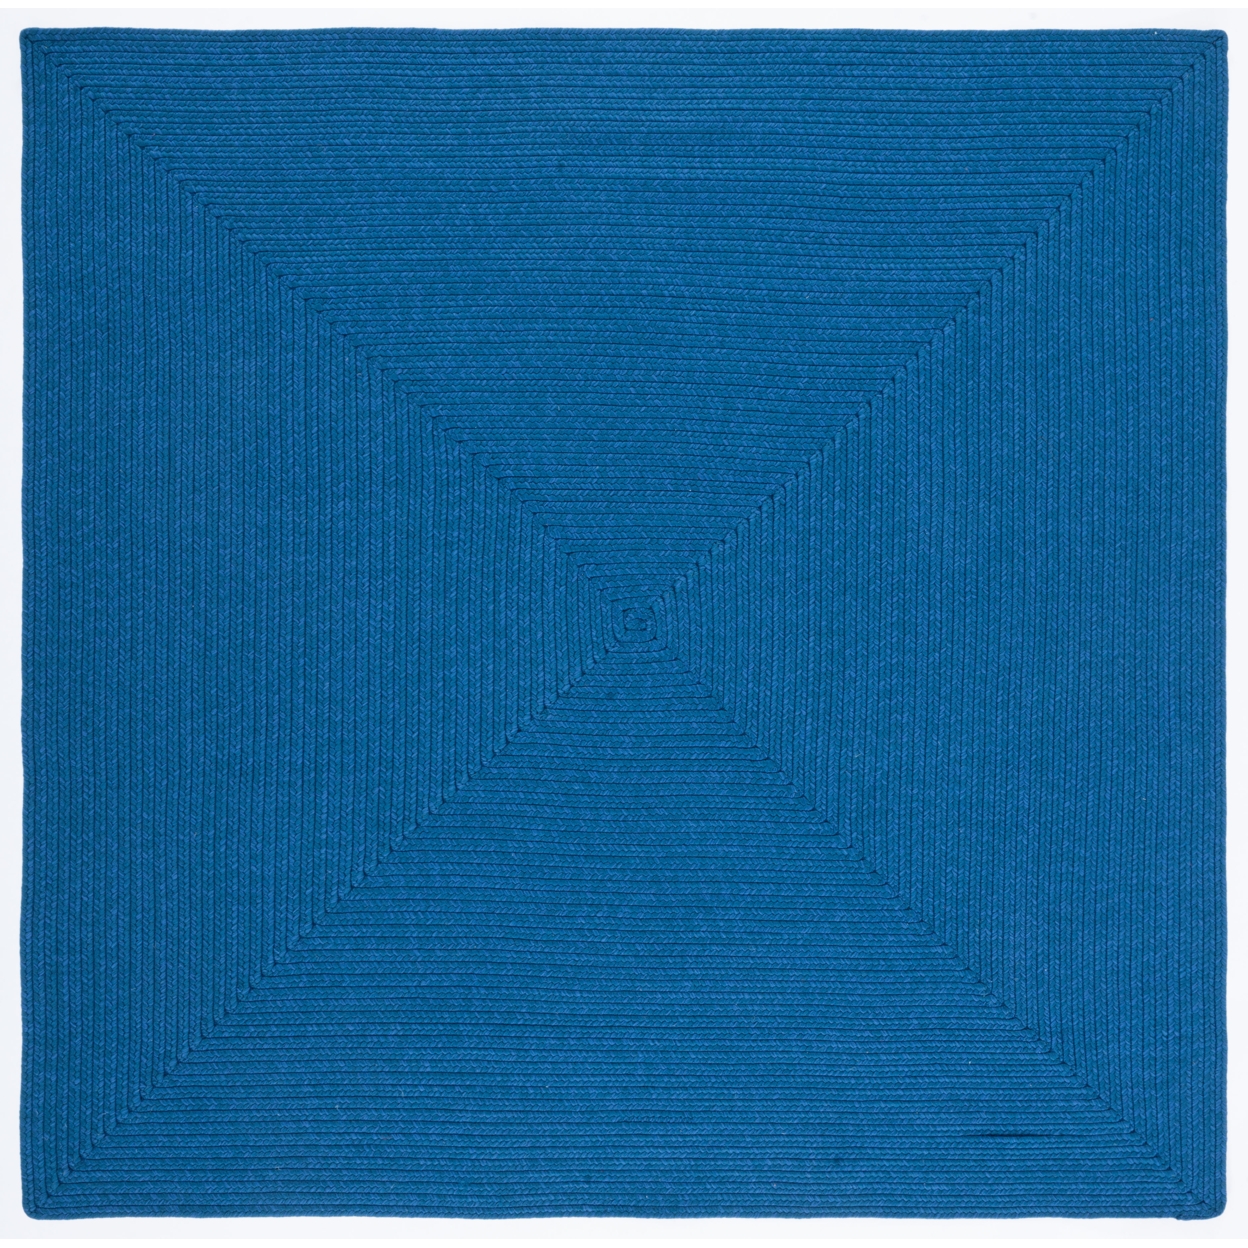 SAFAVIEH Braided Collection BRD315M Handwoven Blue Rug - 8' Square